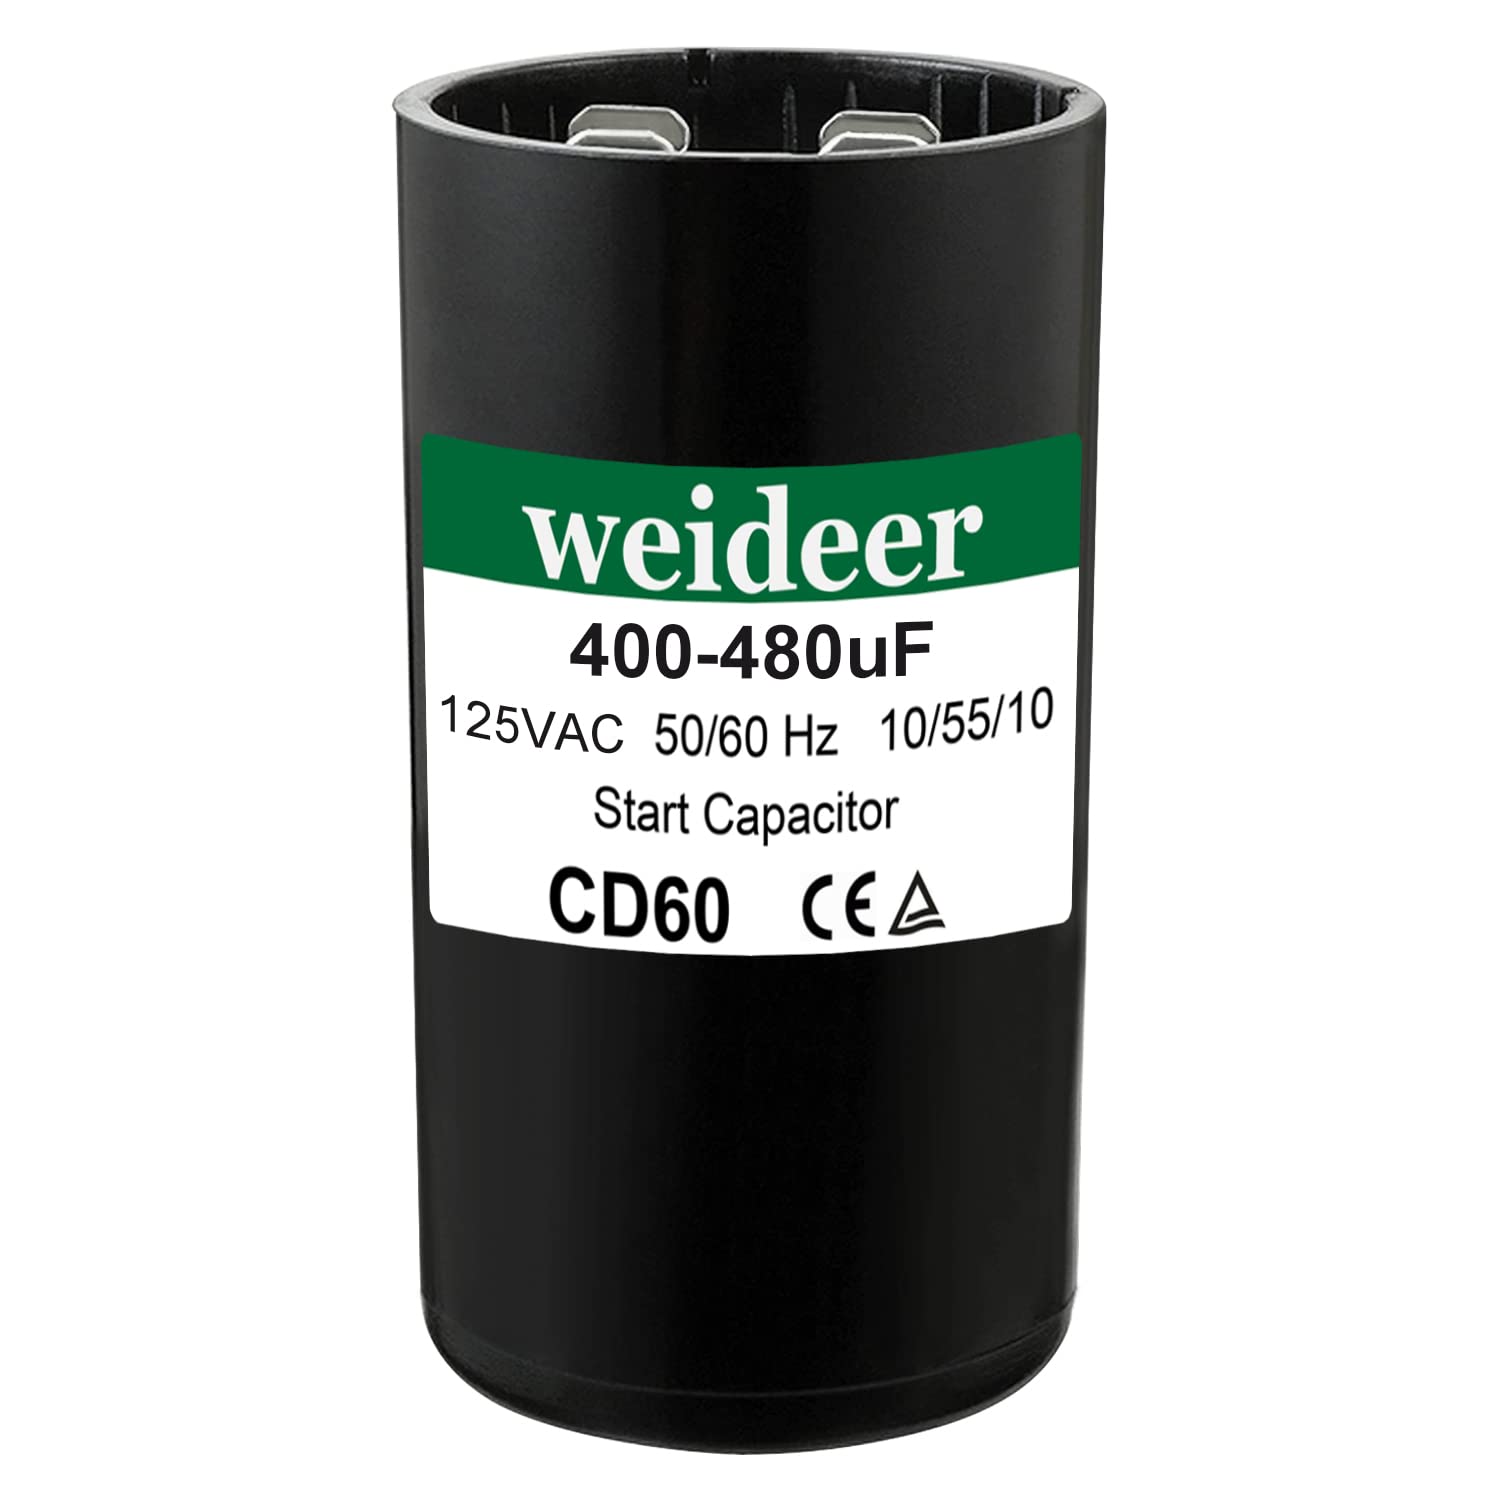 Generic weideer 400-480 uf/MFD Motor Start Capacitor 125 VAC Volts 50/60 Hz for Well Pump and Others